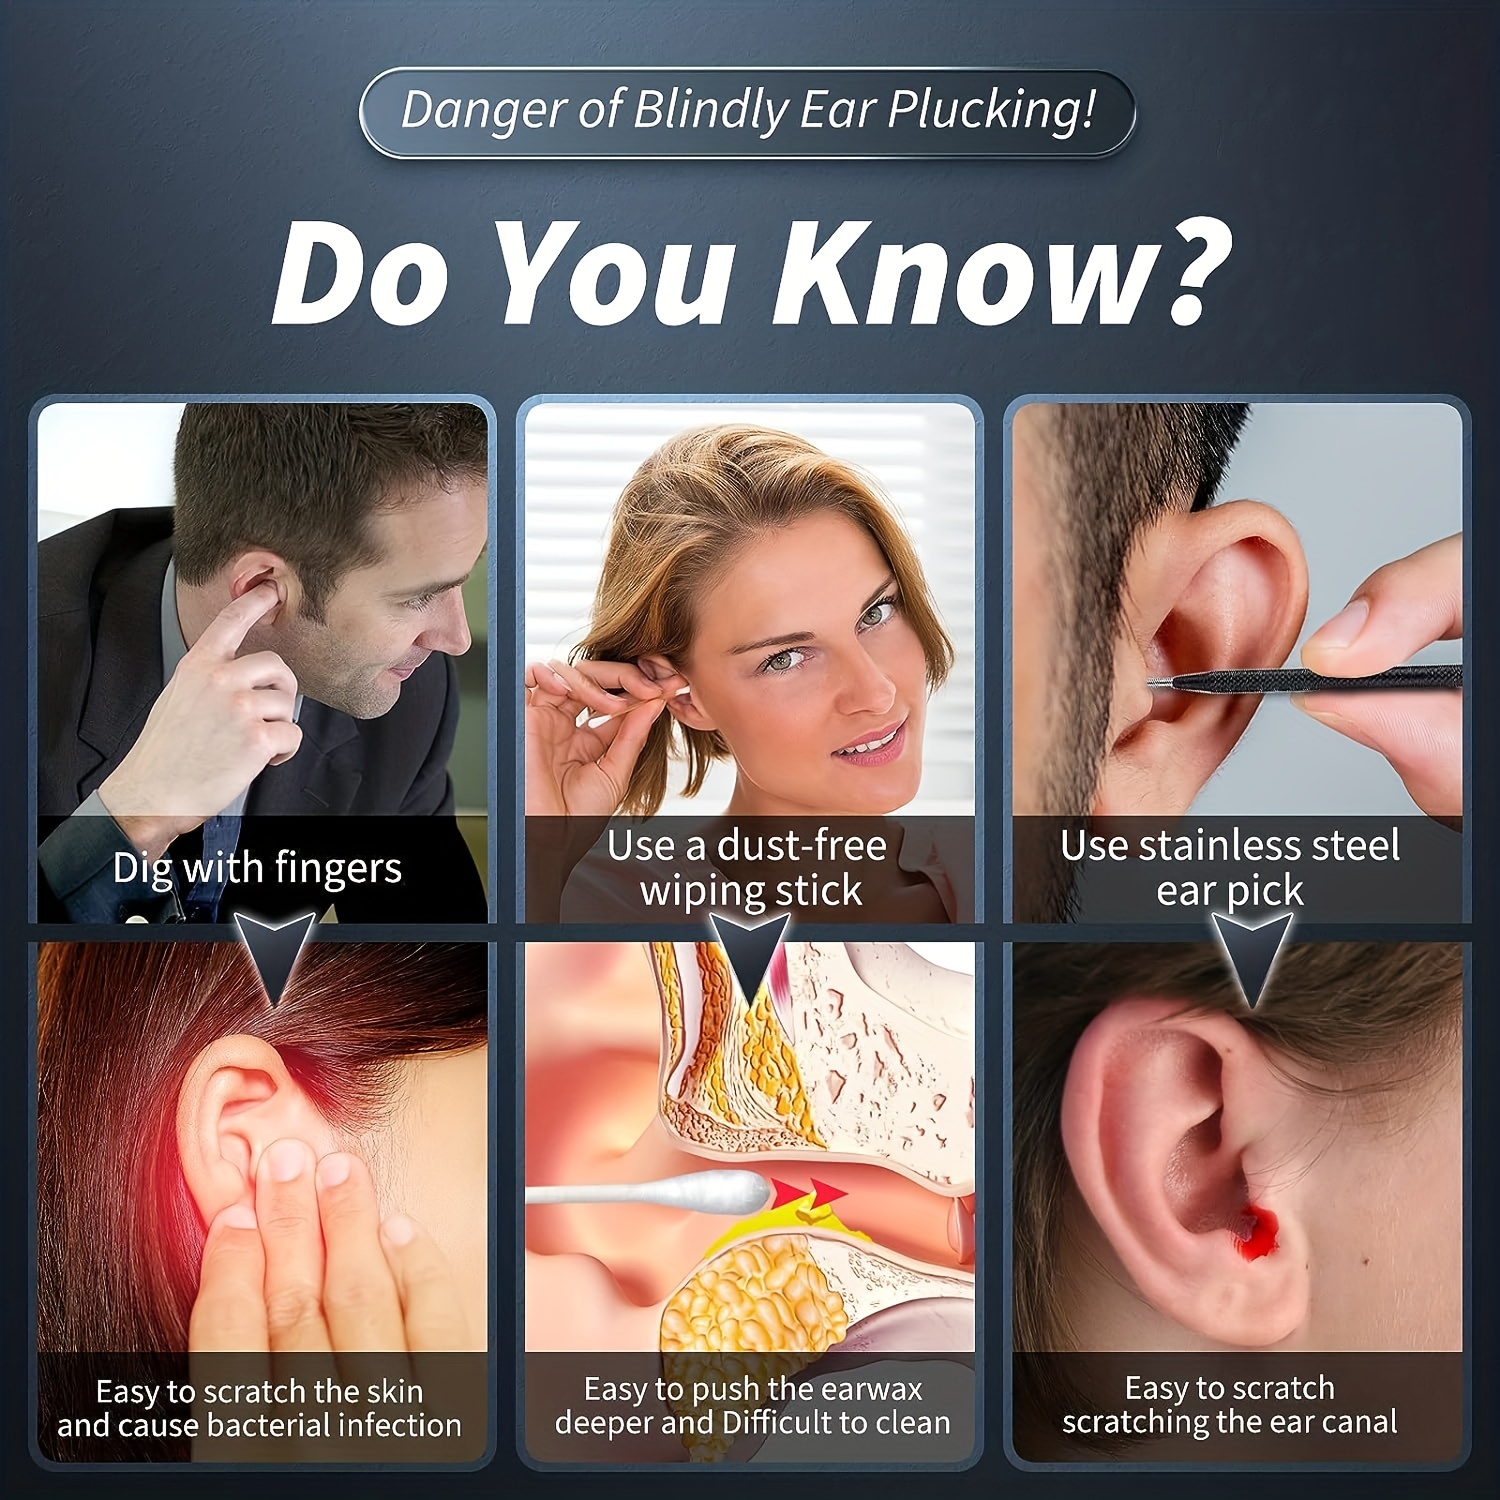 Ear wax removal - dos and don'ts you should know about